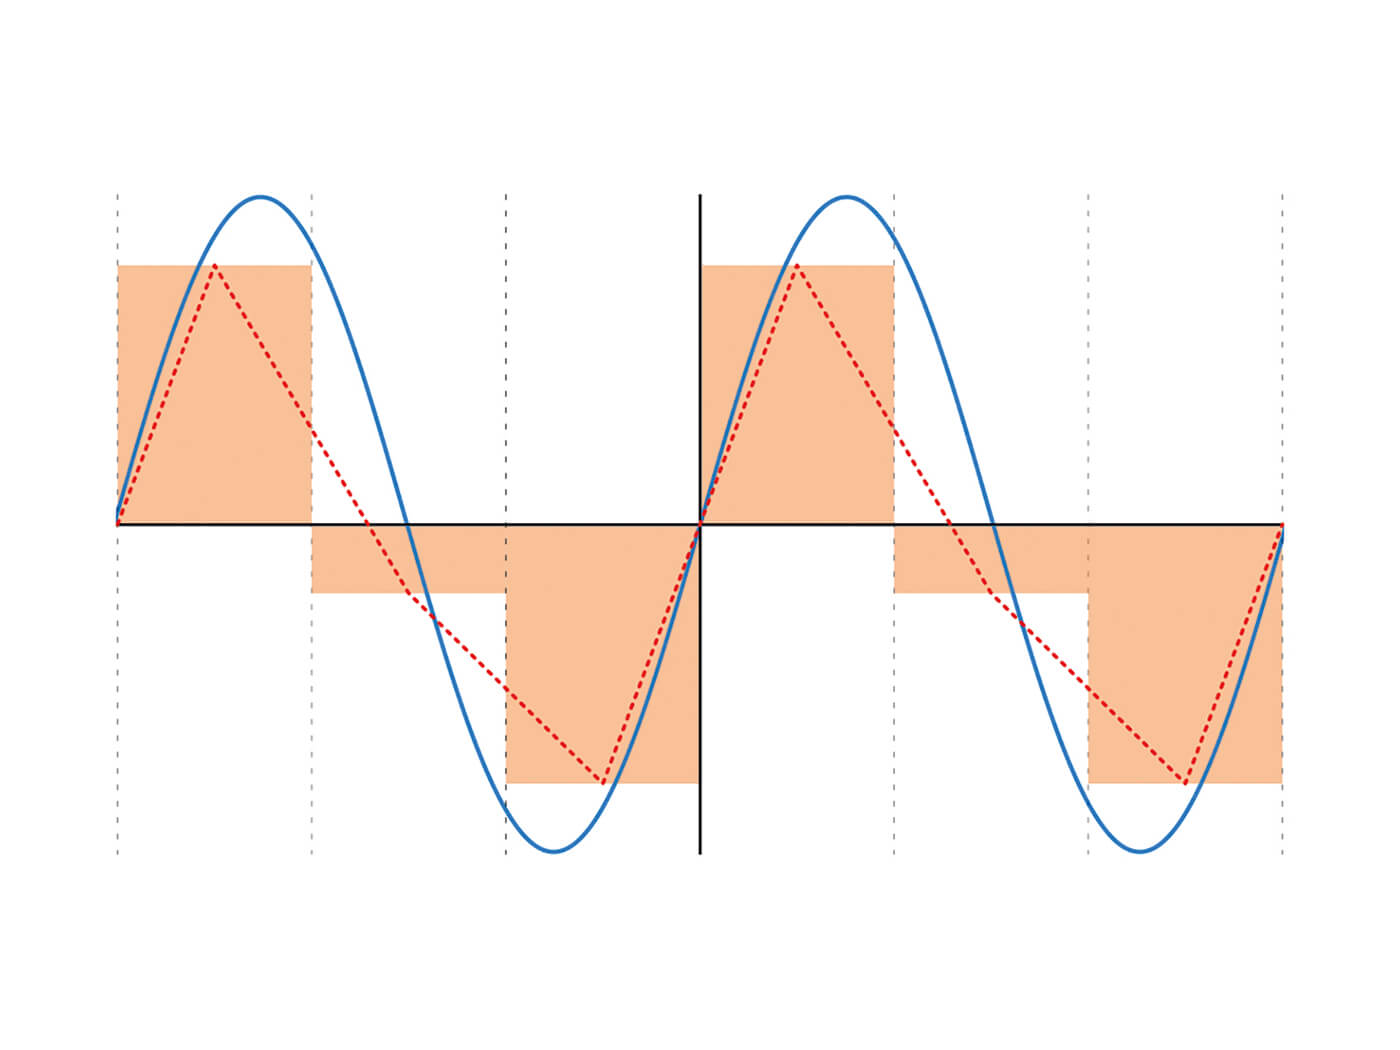 The science of signal sampling, antialiasing